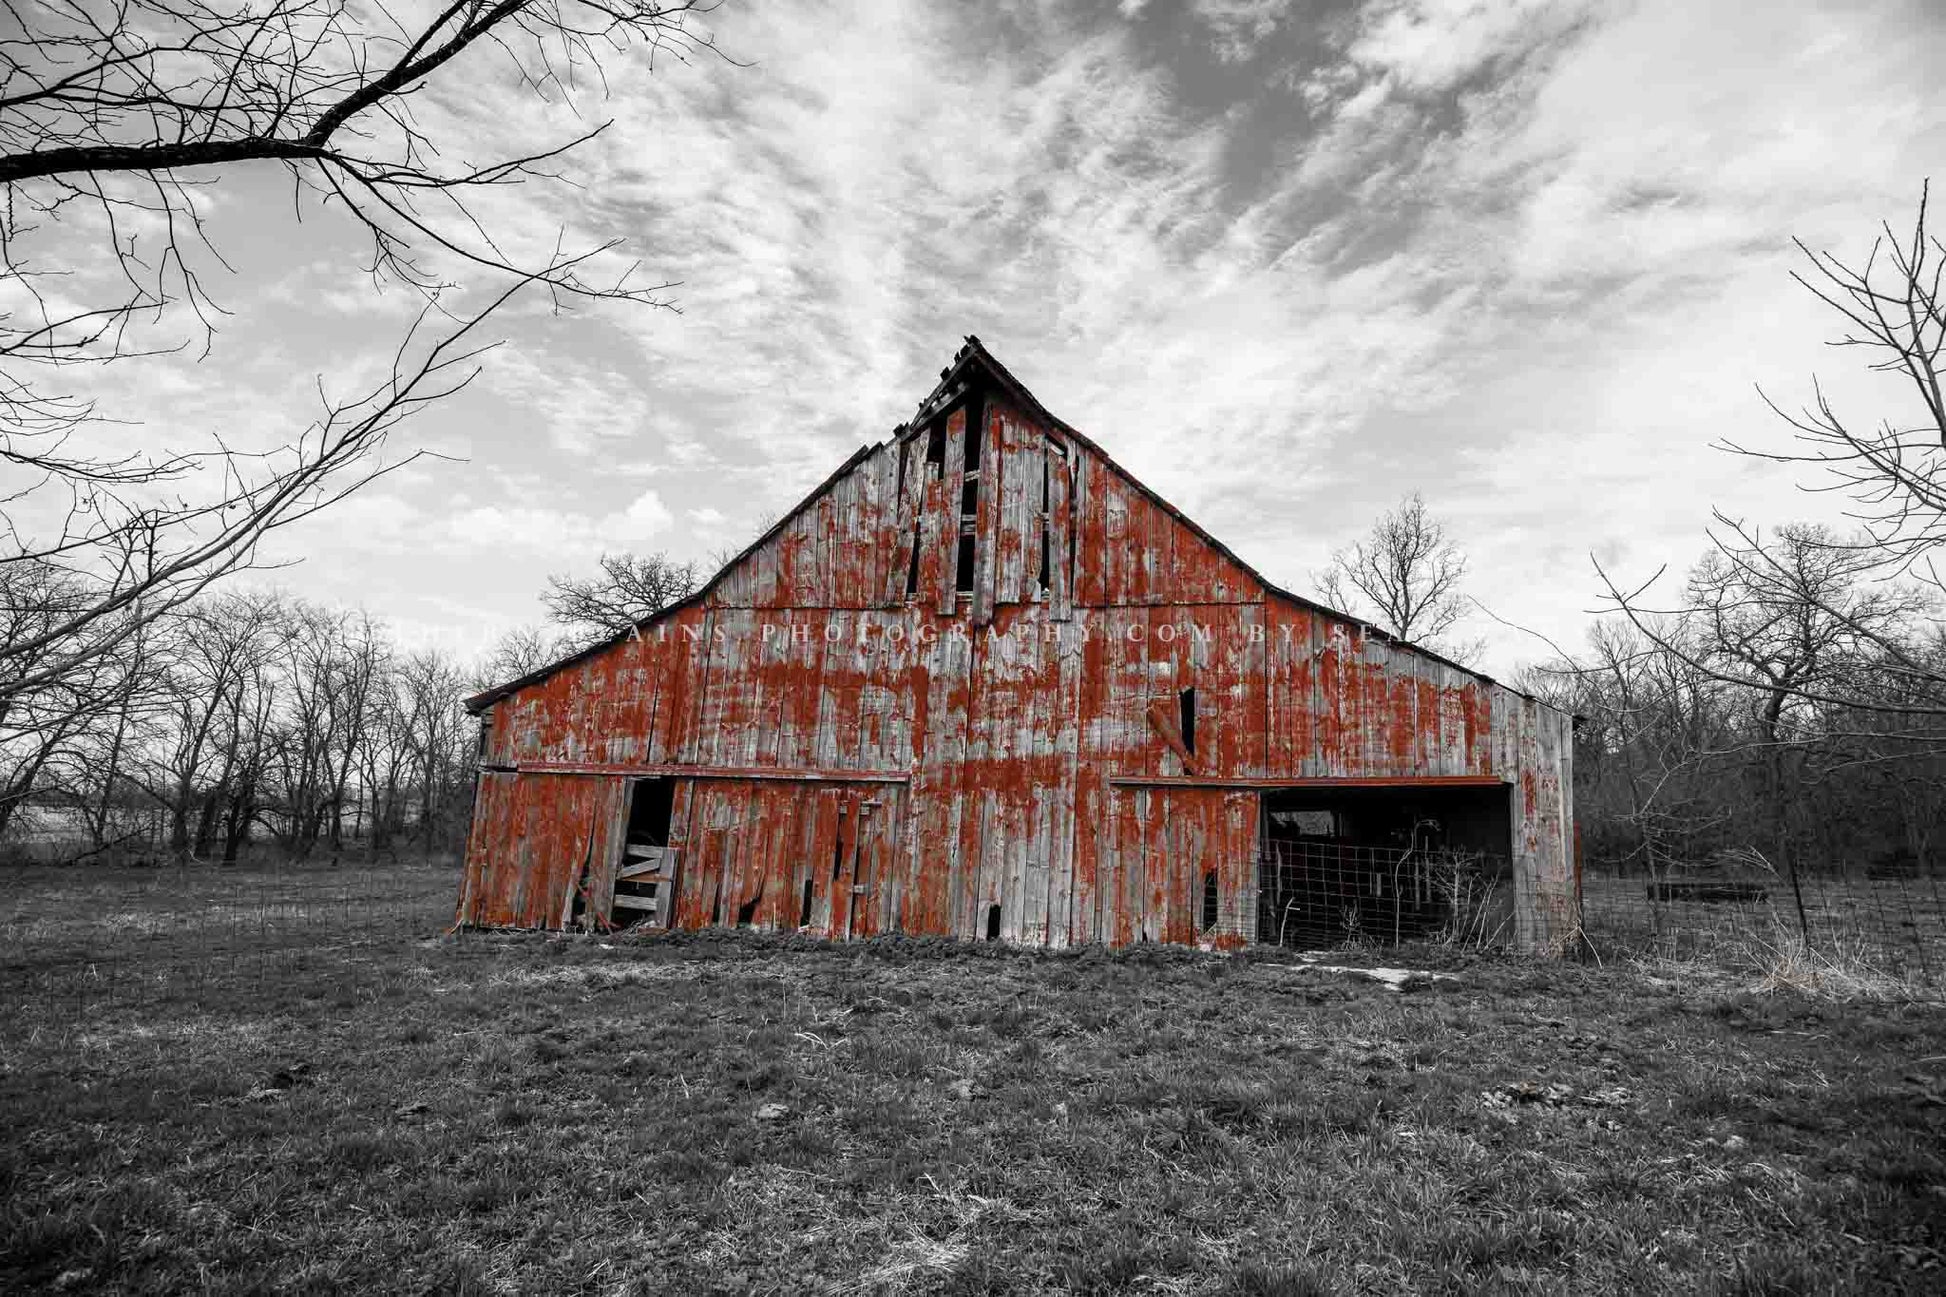 Country photography print of an old barn with worn red paint on a black and white farm landscape in Missouri by Sean Ramsey of Southern Plains Photography.